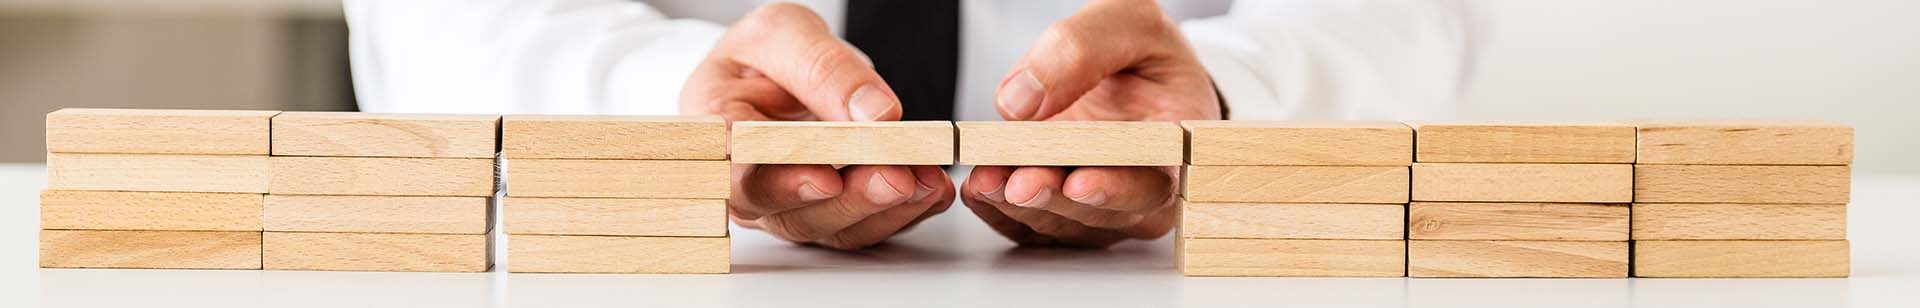 Wide view image of businessman making a connection between two stack of wooden pegs in a conceptual image of business solution or merger.